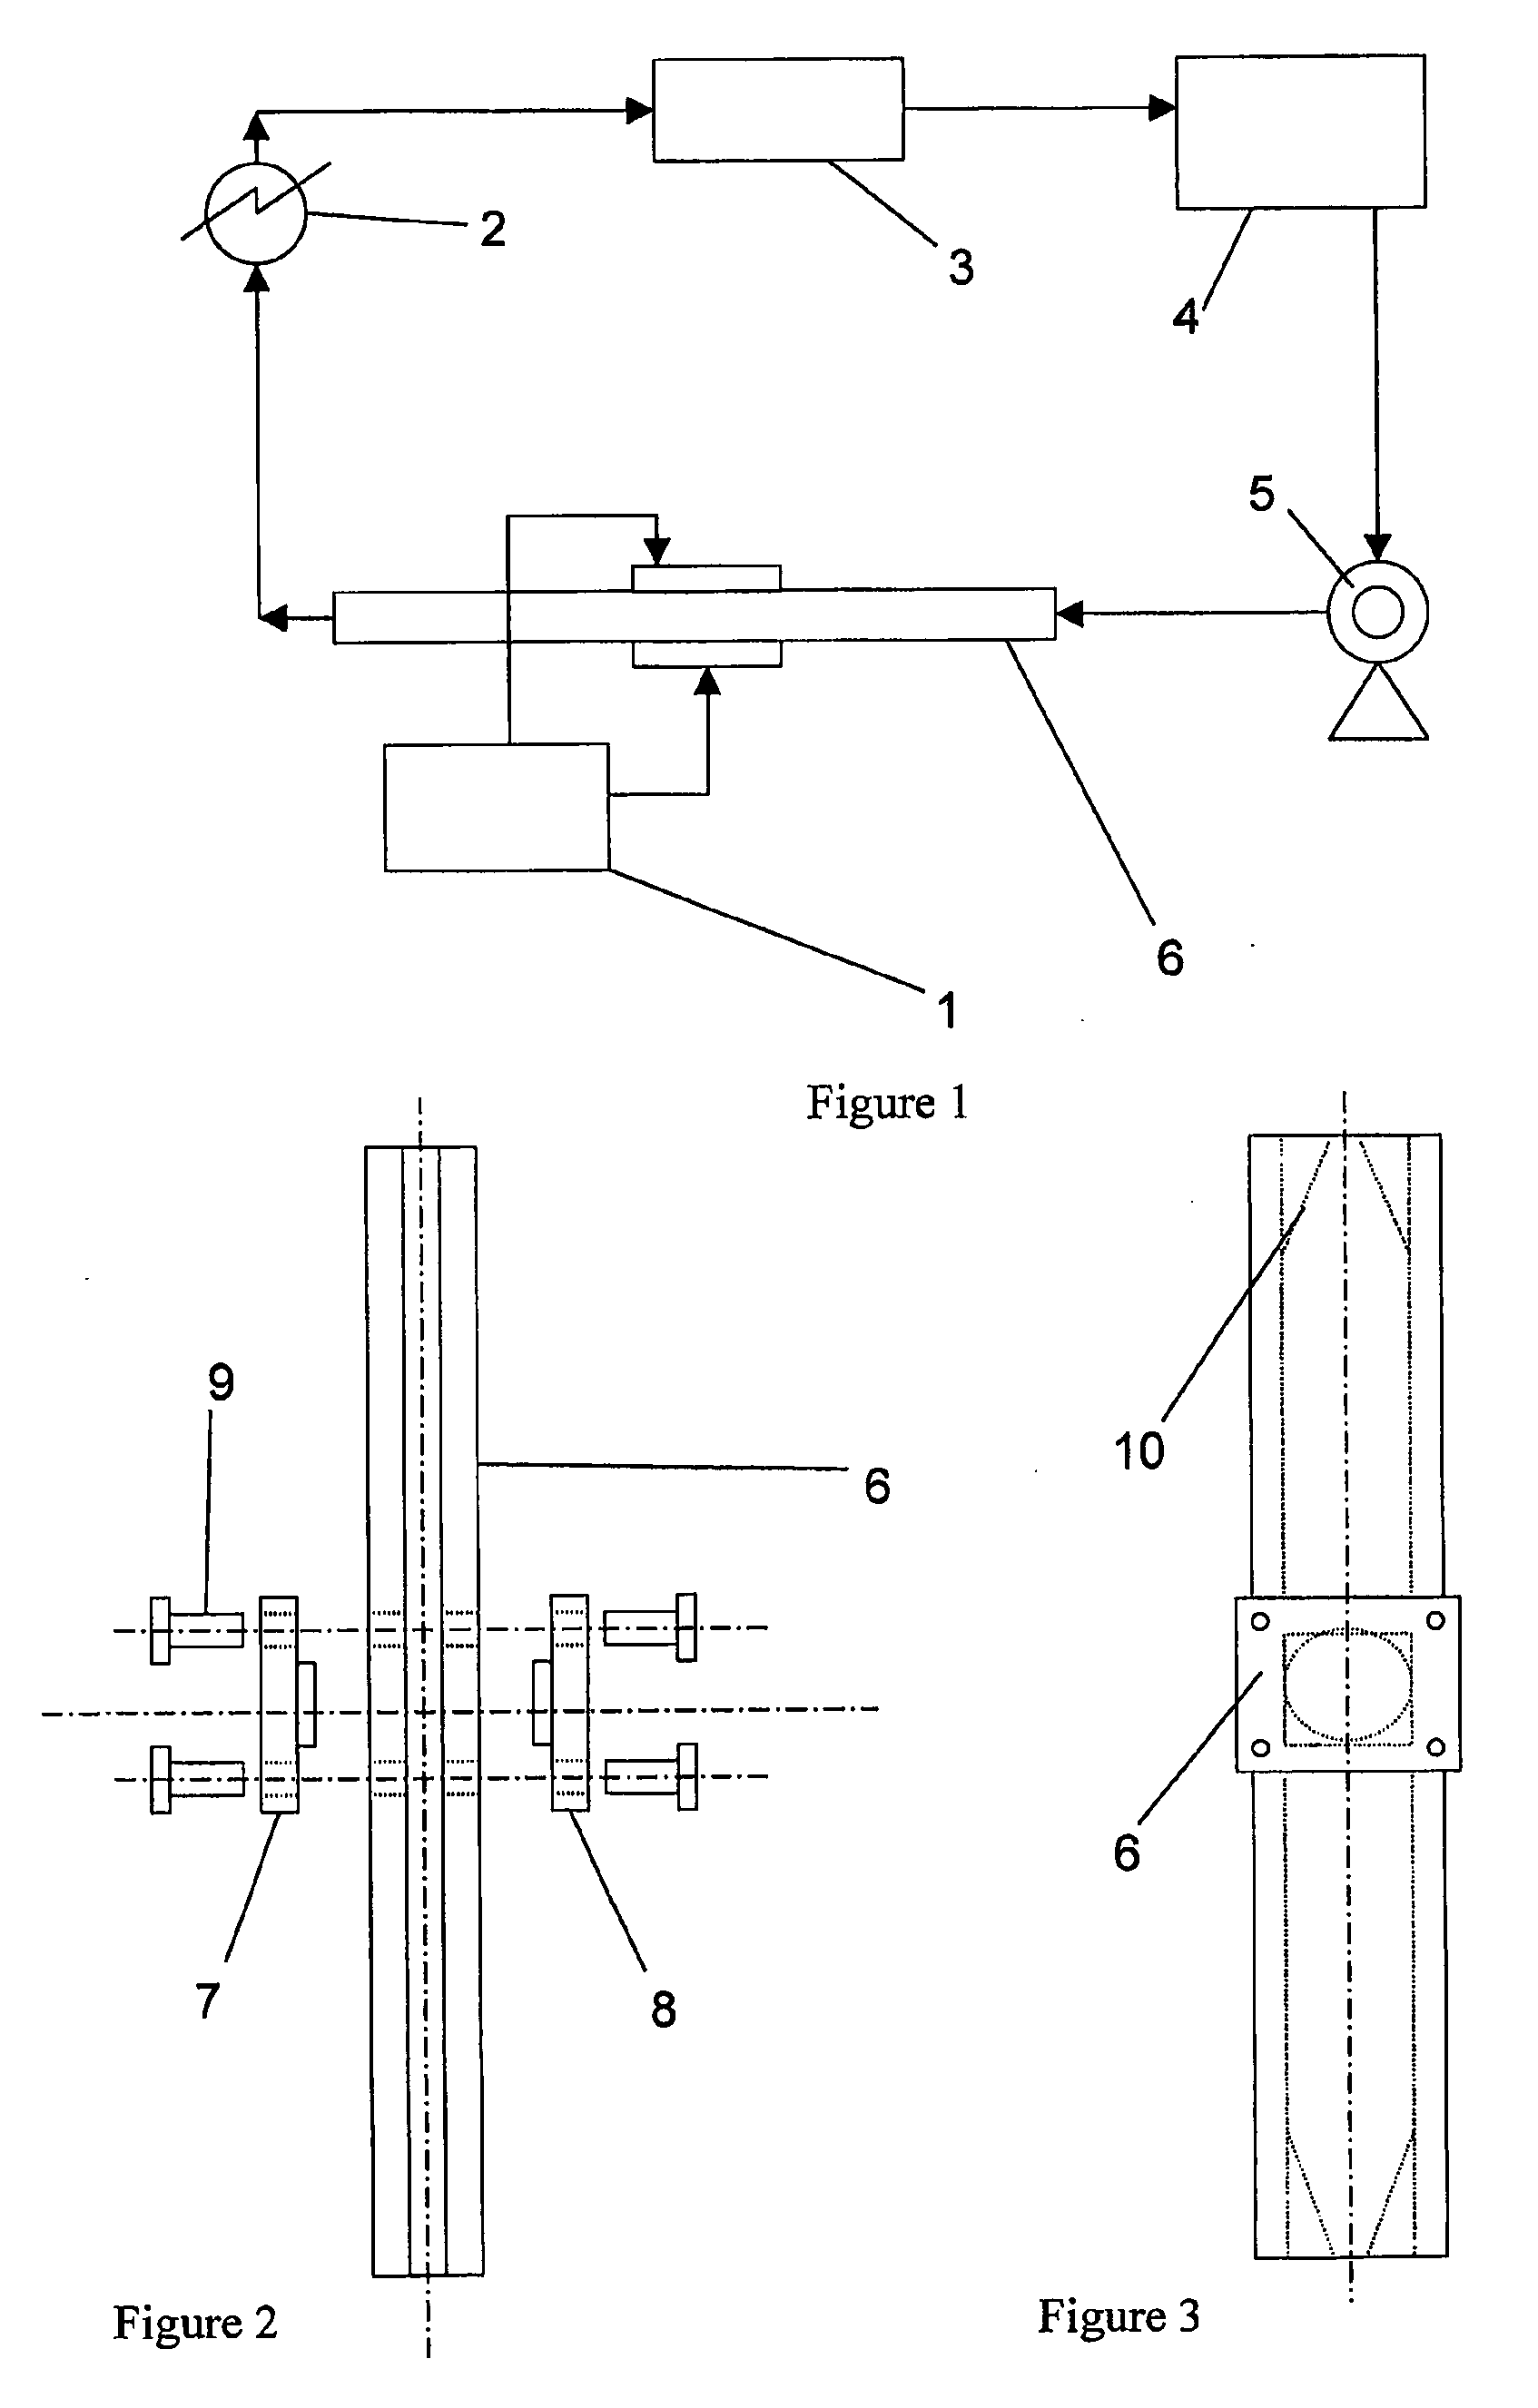 Process for Manufacturing Micro-and Nano-Devices